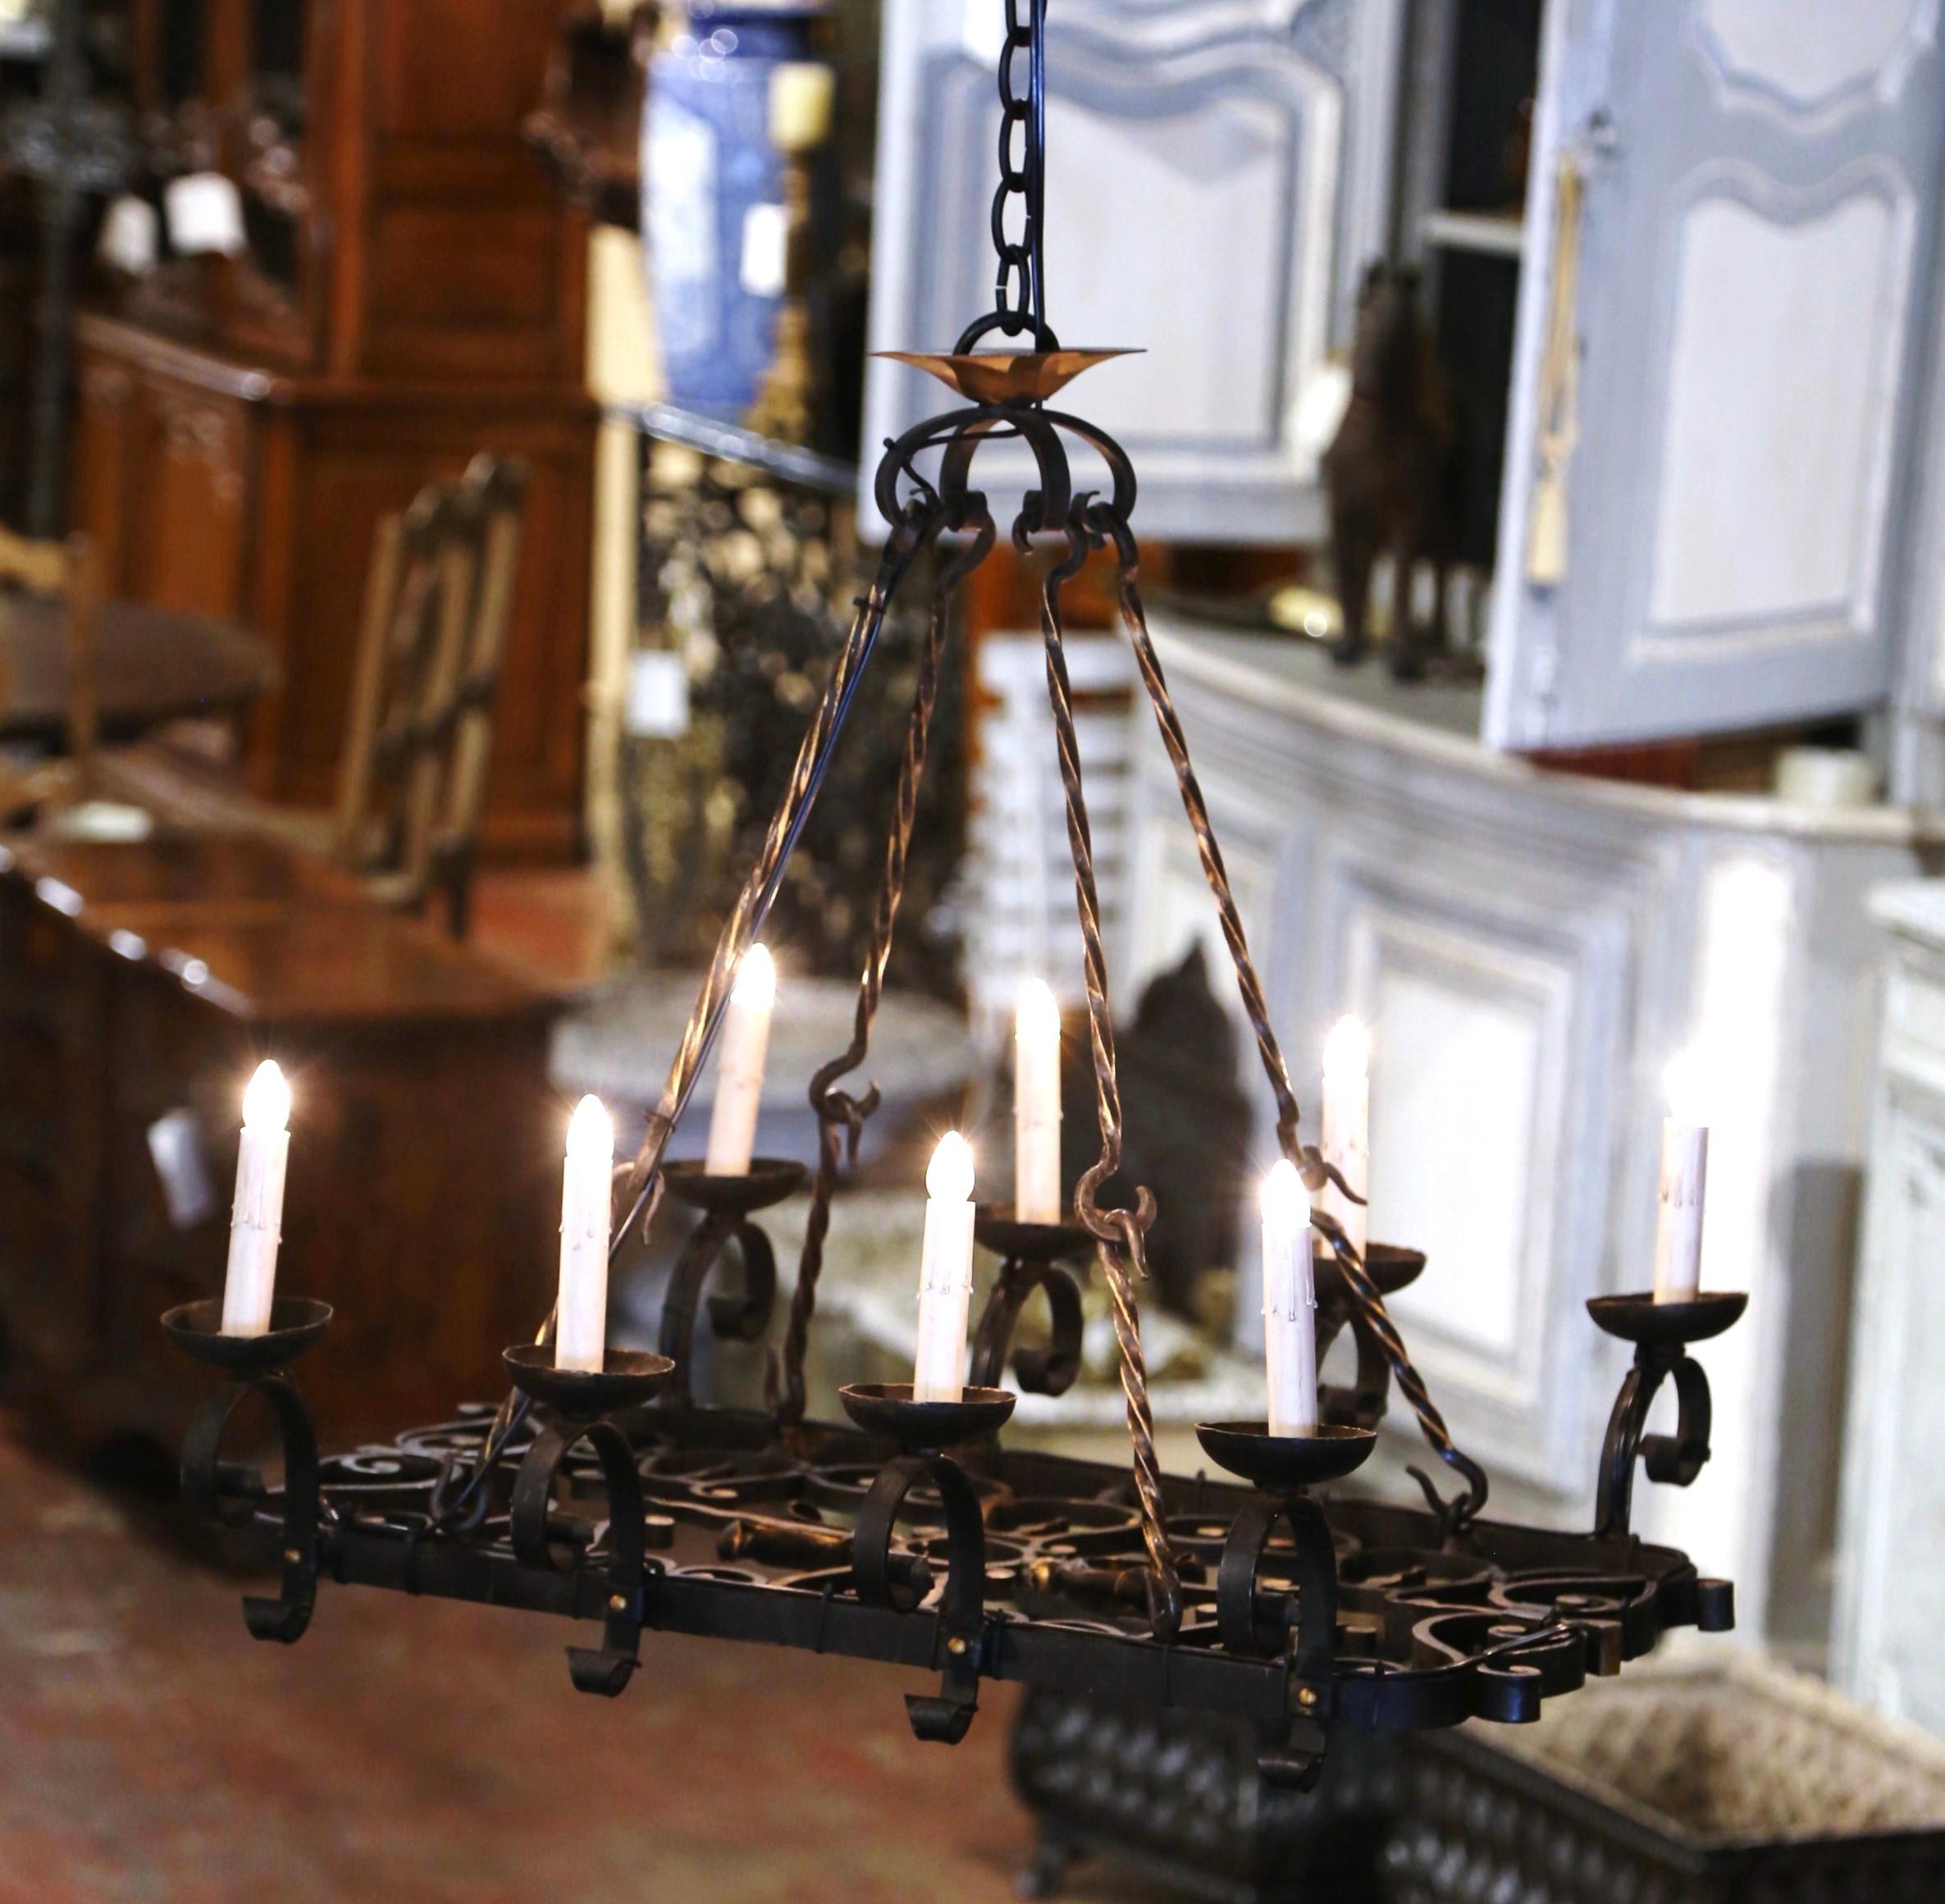 Decorate a kitchen island or breakfast room with this elegant antique flat bottom light fixture. Forged in France, circa 1920 and rectangular in shape, the large chandelier has eight lights newly wired, and dressed with decorative dripping candle